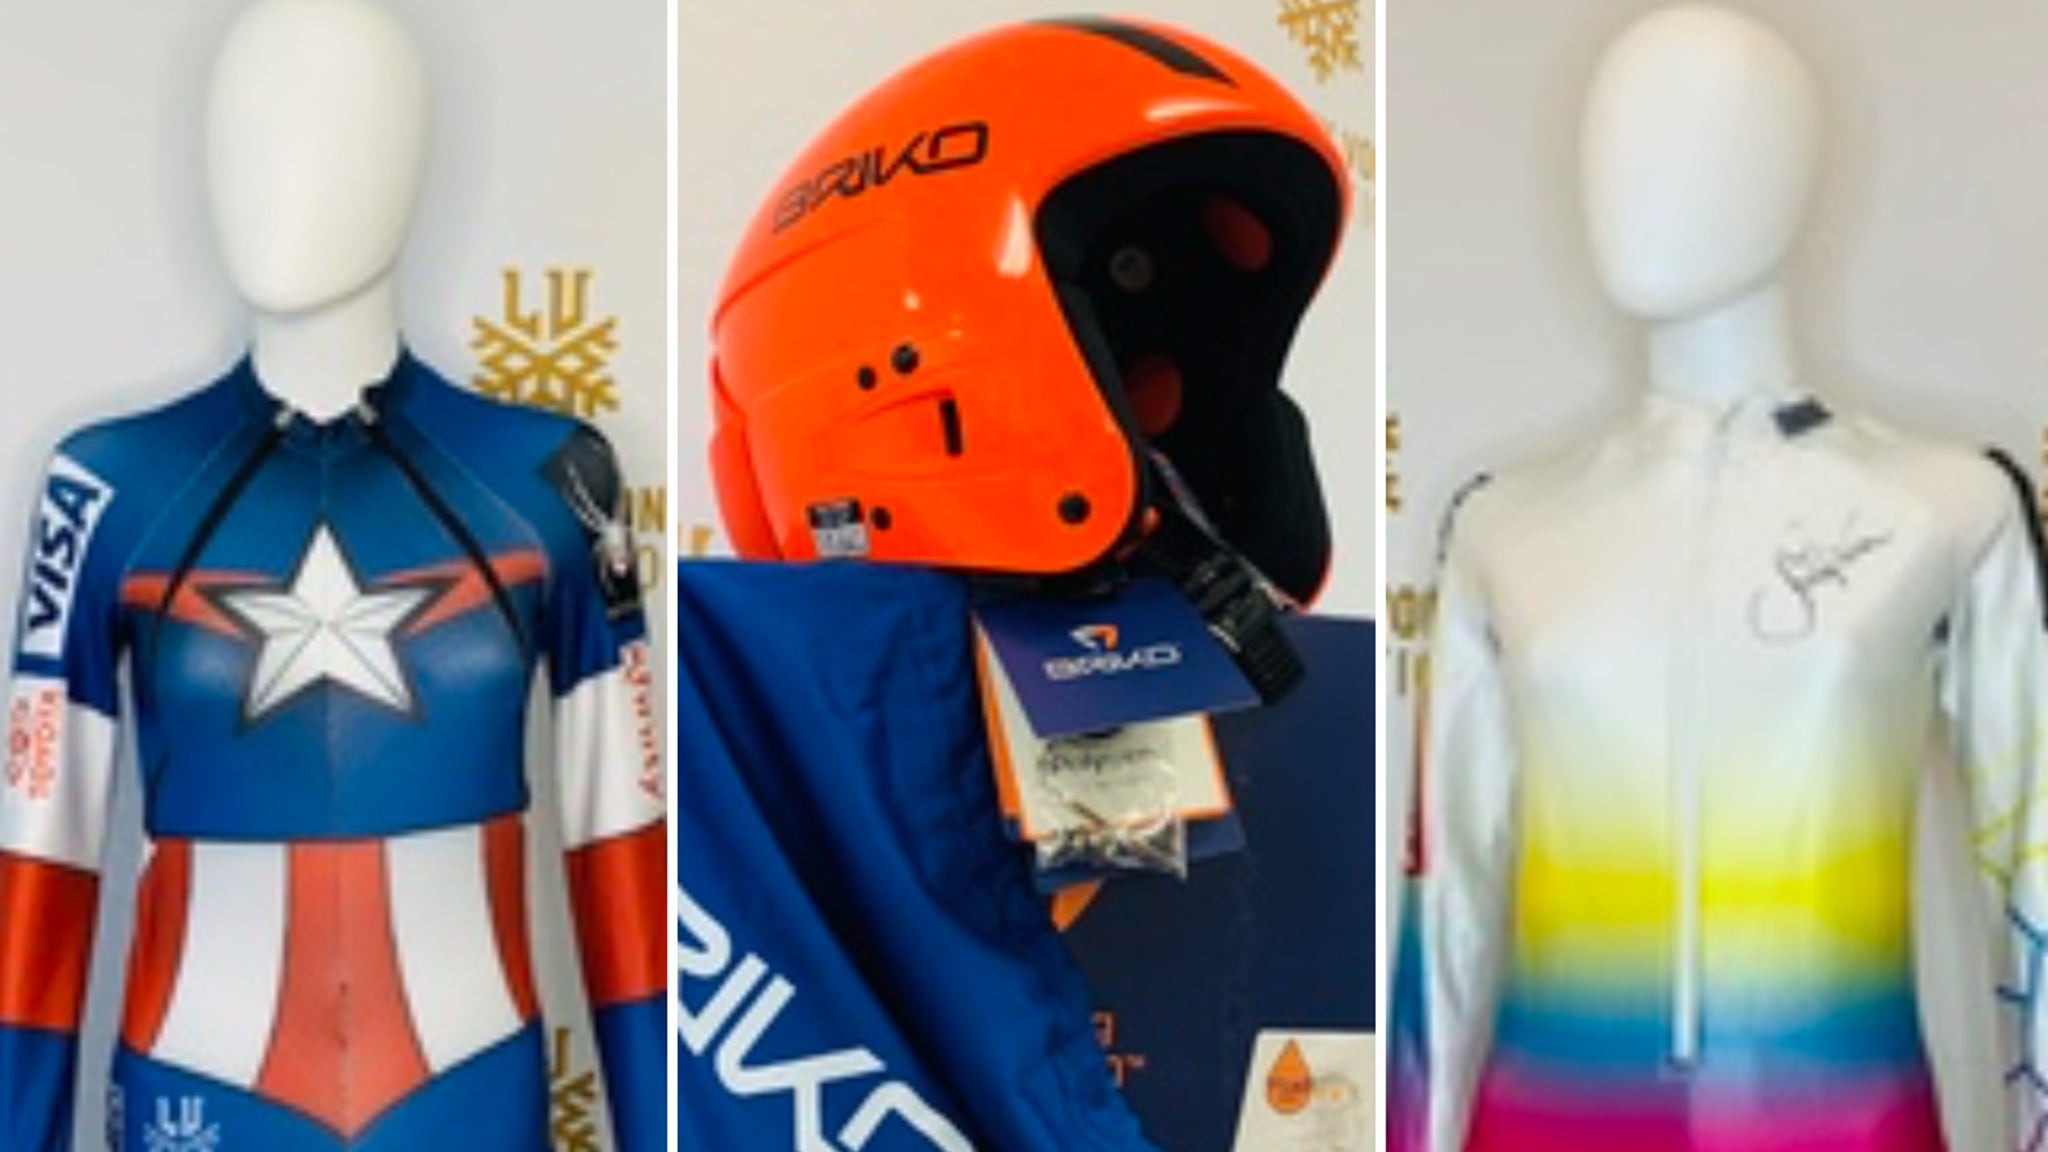 Lindsey Vonn Auctioning Ski Speed Suits For Charity, 'Most Prized Possessions'